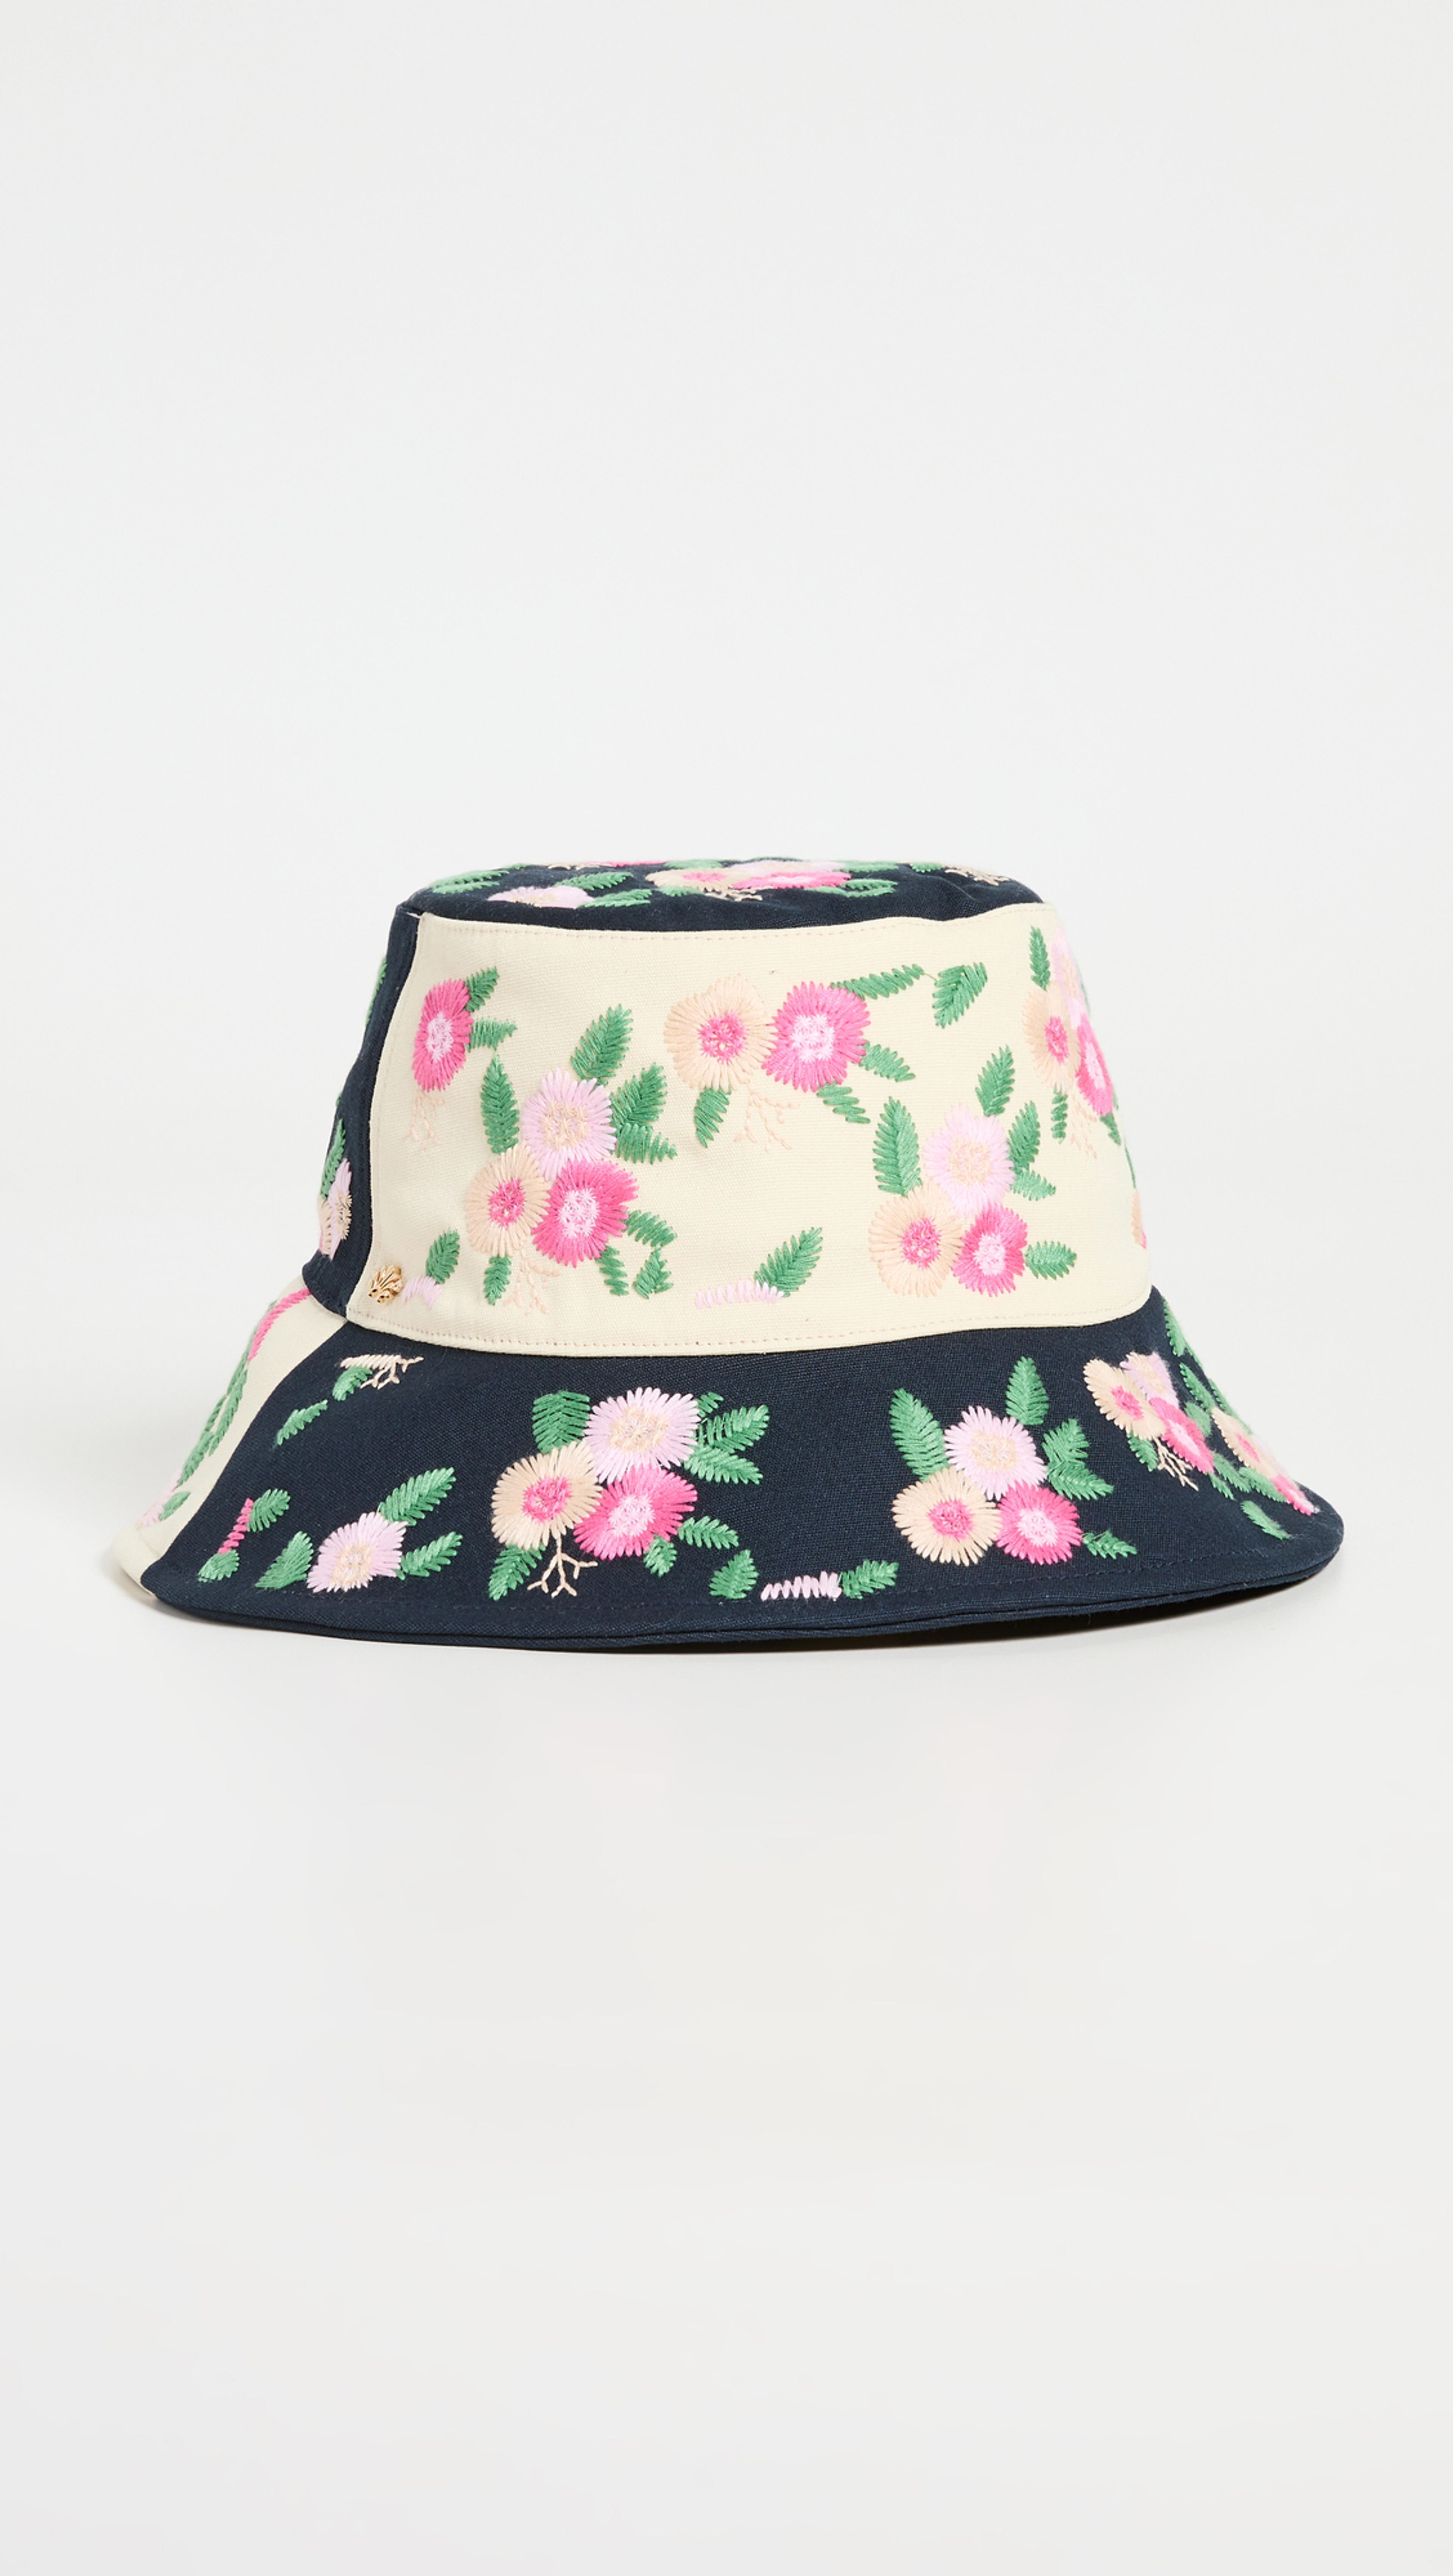 Floral Embroidered Bucket Hat